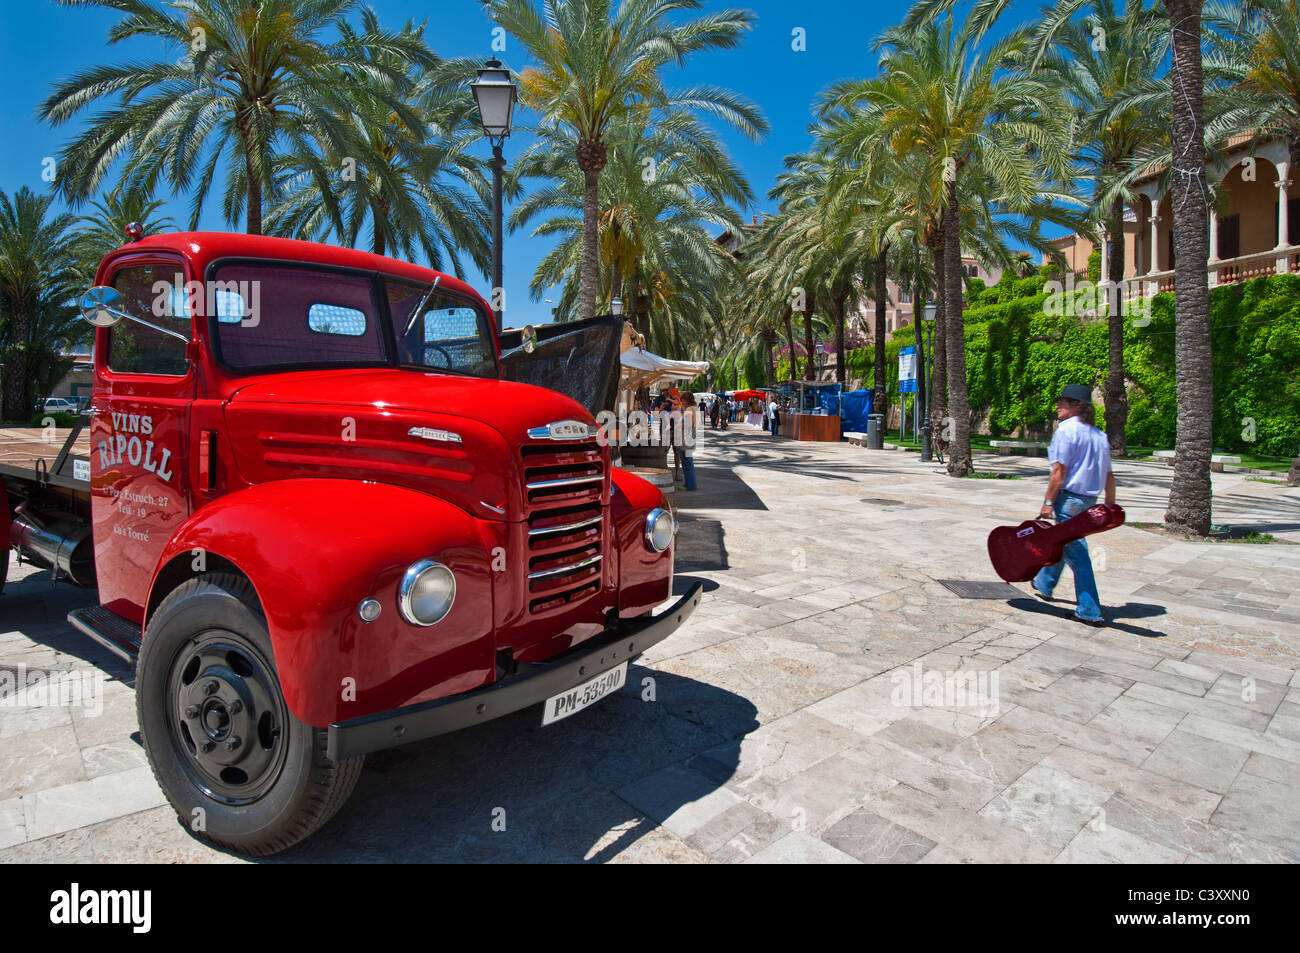 PALMA OUTDOOR MARKET STALLS Vintage Spanish red delivery lorry advertising wine market stall with man carrying Spanish guitar Palma de Mallorca Spain Stock Photo